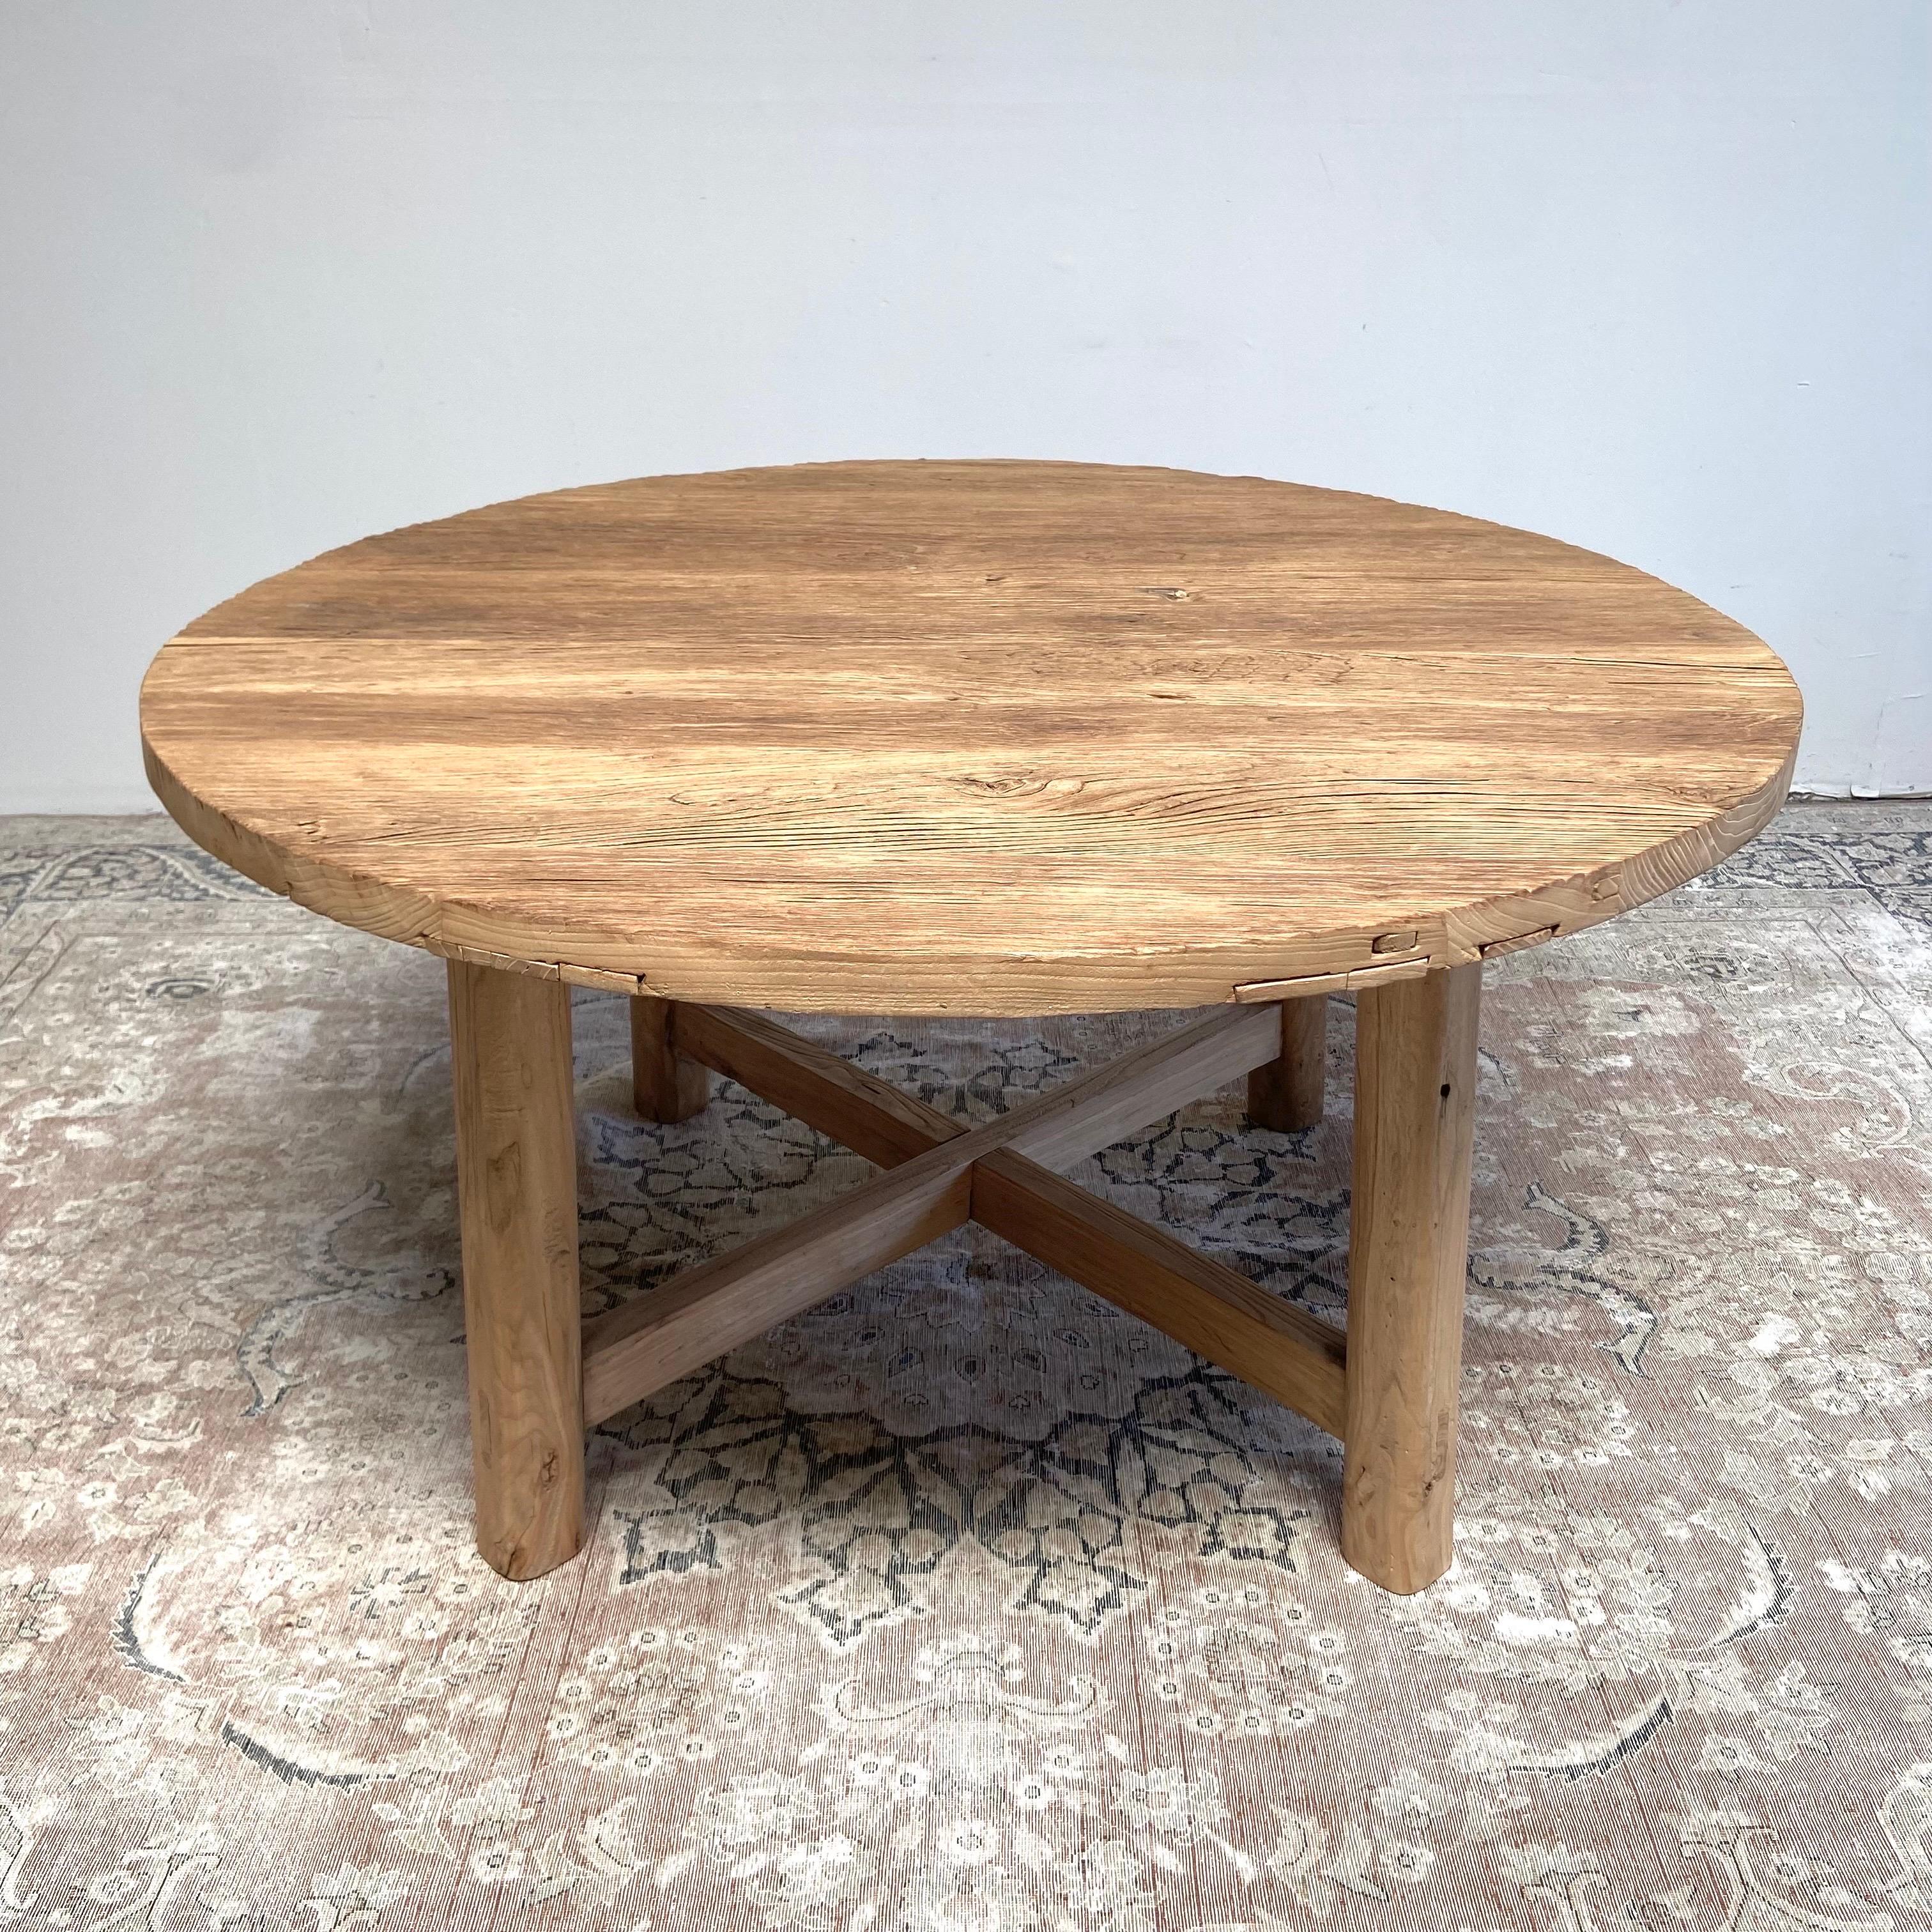 Custom Made Elm wood dining table
Made from reclaimed elm timbers. This round dining table is 60